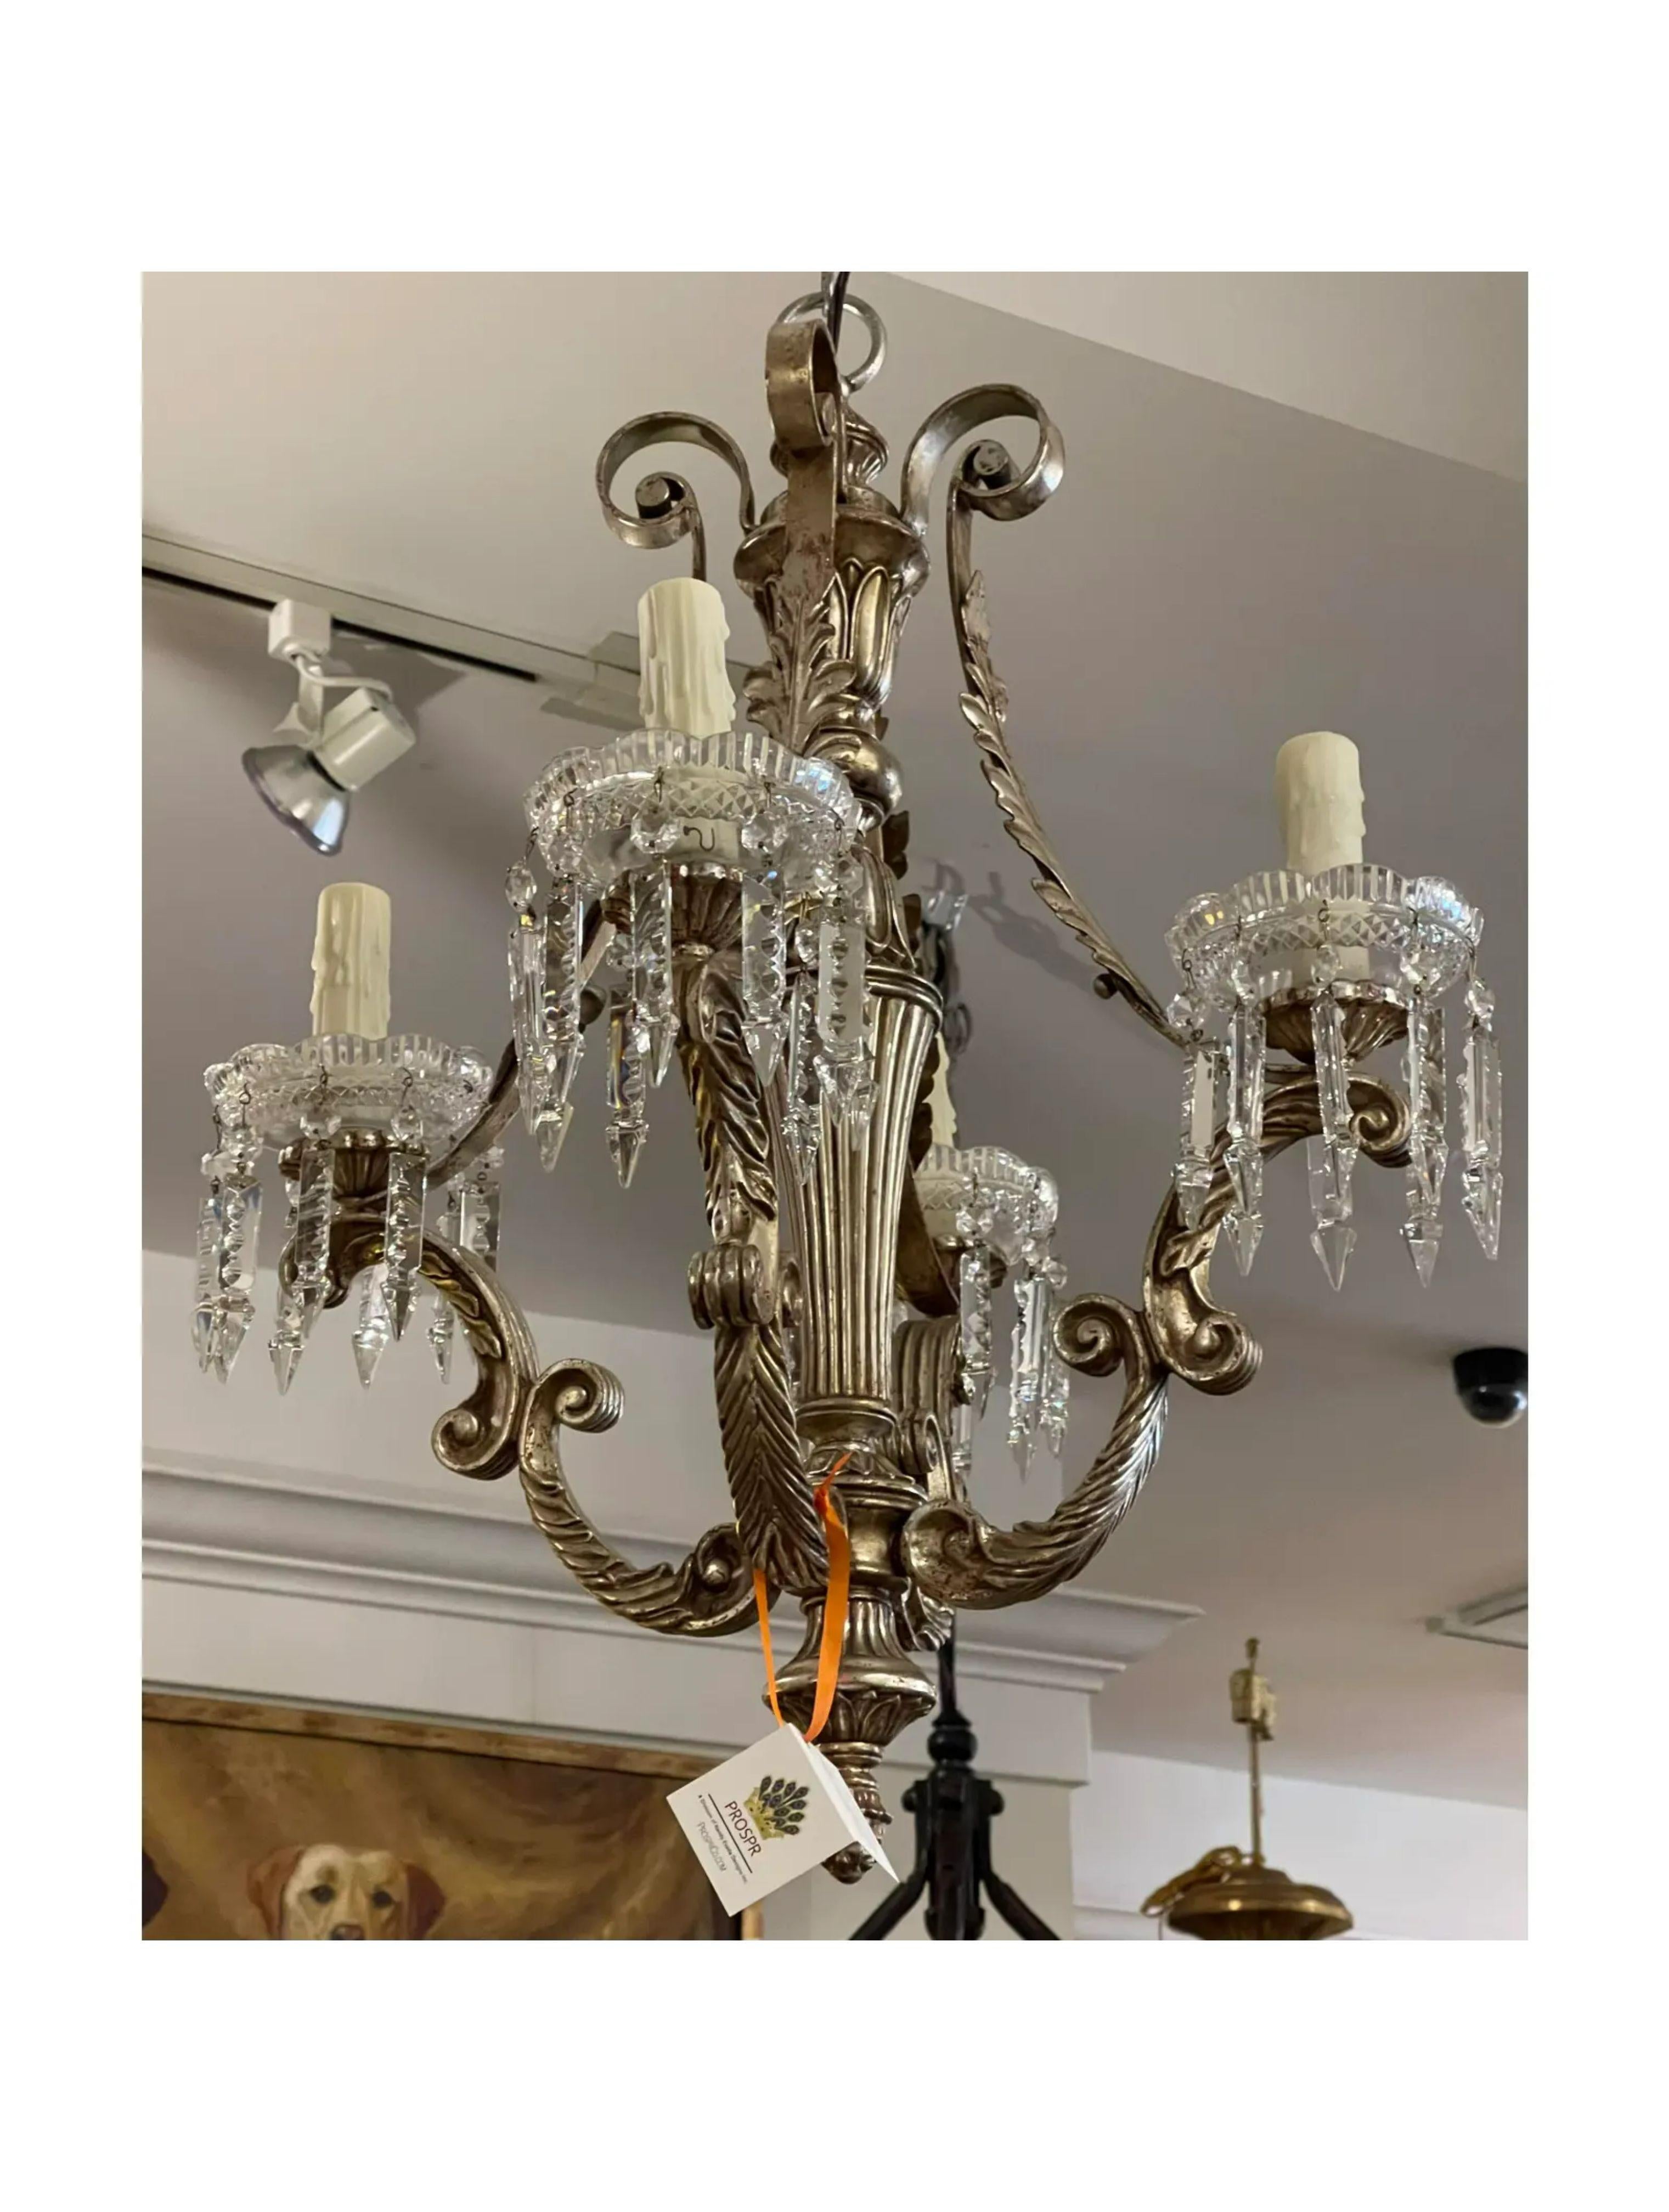 Antique Italian silver gilt metal chandelier. It includes 4 lights with Austrian crystal bobeches and prisms.

Additional information:
Materials: crystal, lights, silver
Color: silver
Period: 1920s
Styles: Italian
Power Sources: Up to 120V